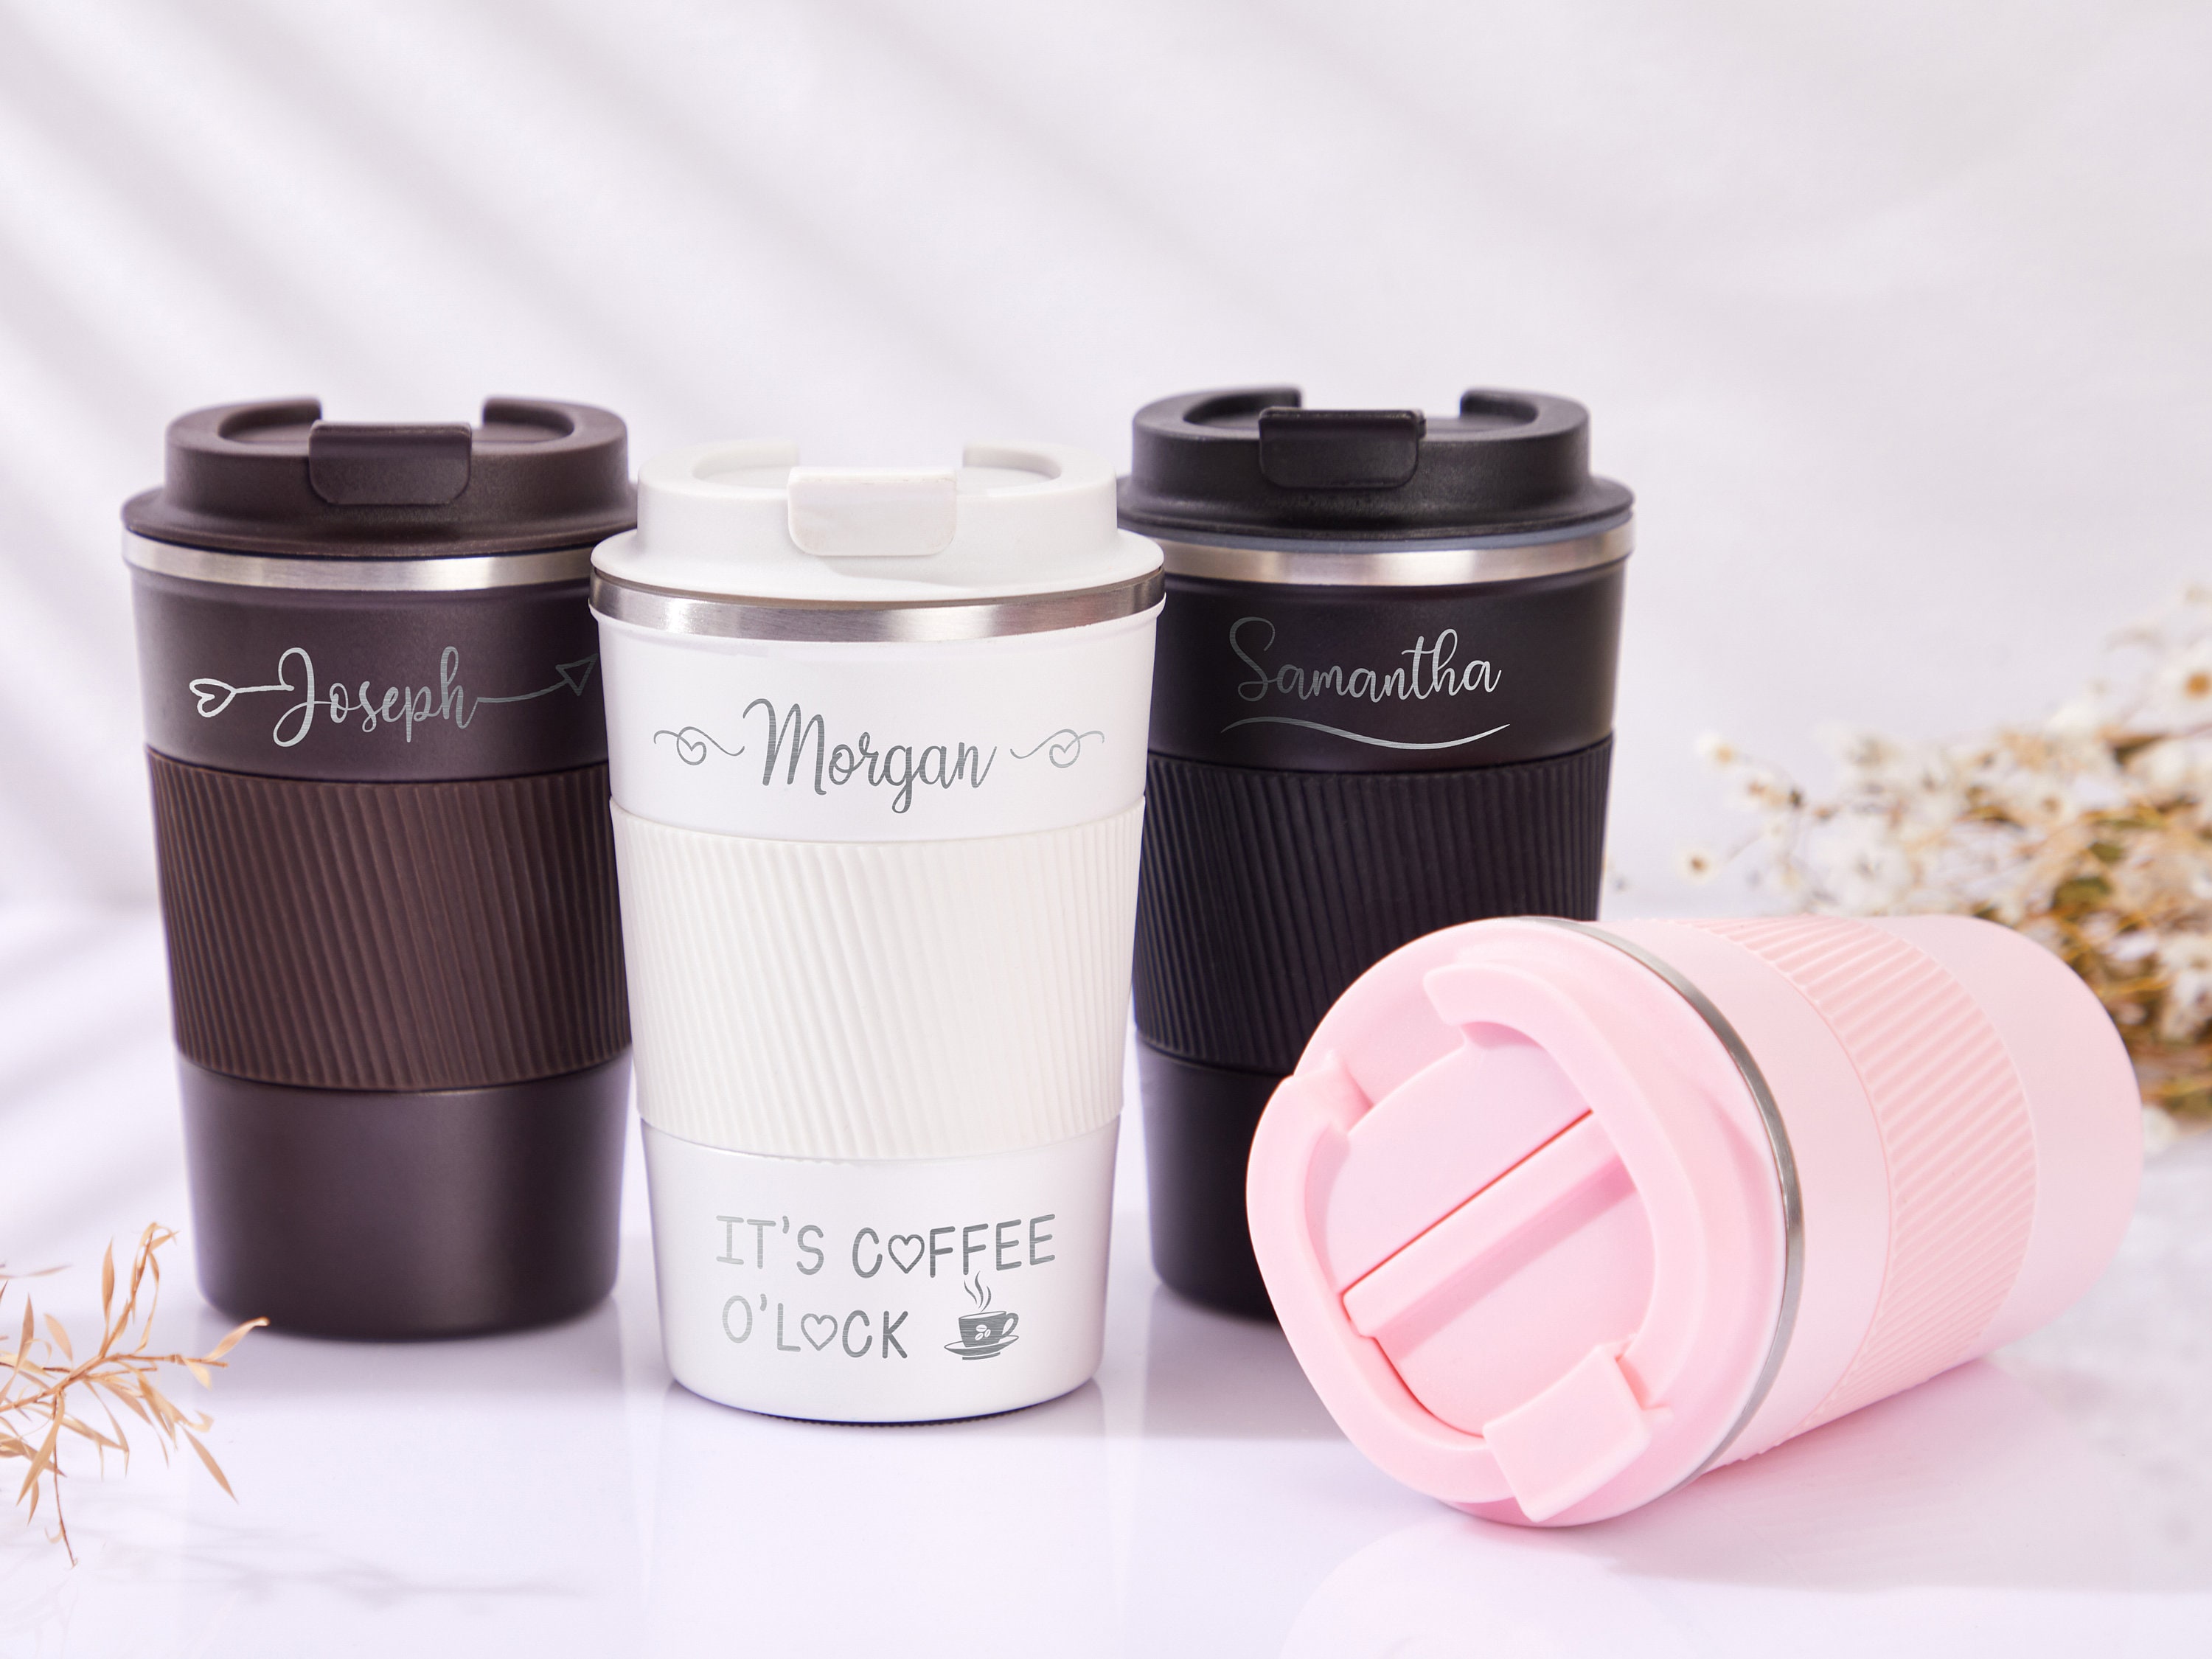 Leak Proof Spill Proof Hot Beverage Stainless Steel Portable Thermal  Tumbler Cup Vacuum-Insulated 16 Oz Coffee Travel Mug with Lid - China  Eco-Friendly Metal Tumbler and Engraved Metal Tumbler price